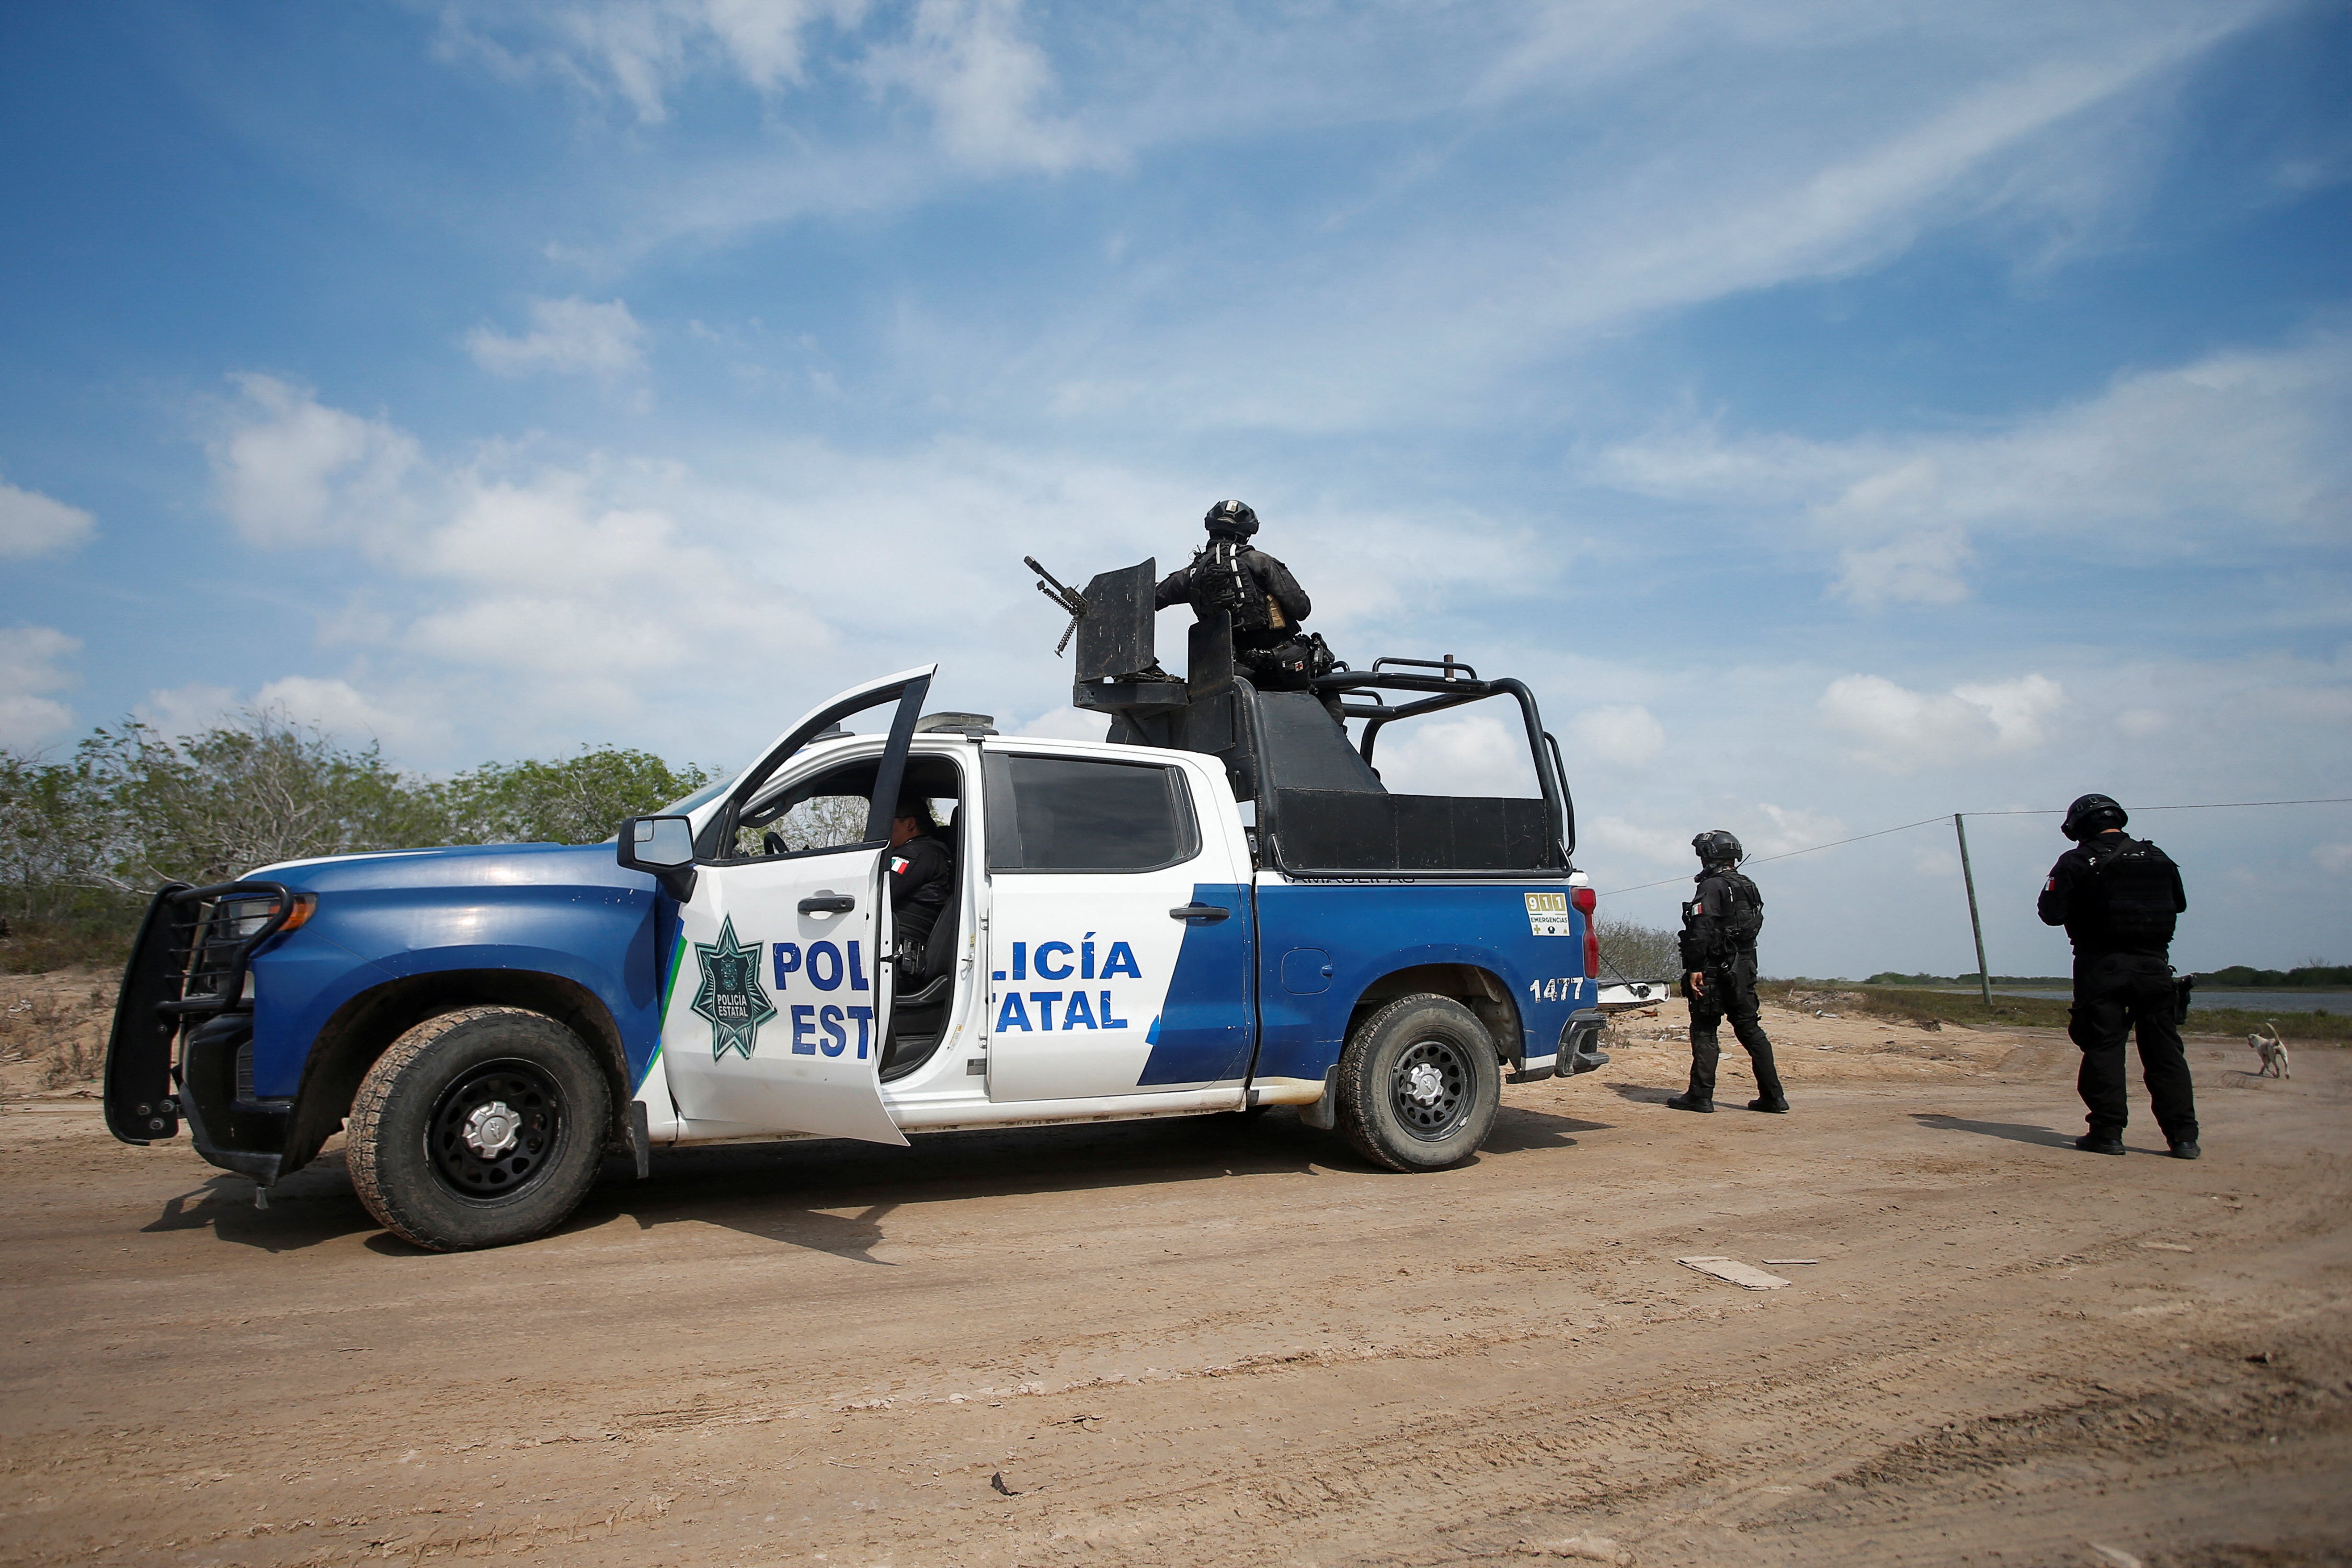 State police officers keep watch at the scene where authorities found the bodies of two of four Americans kidnapped by gunmen, in Matamoros, Mexico, March 7, 2023